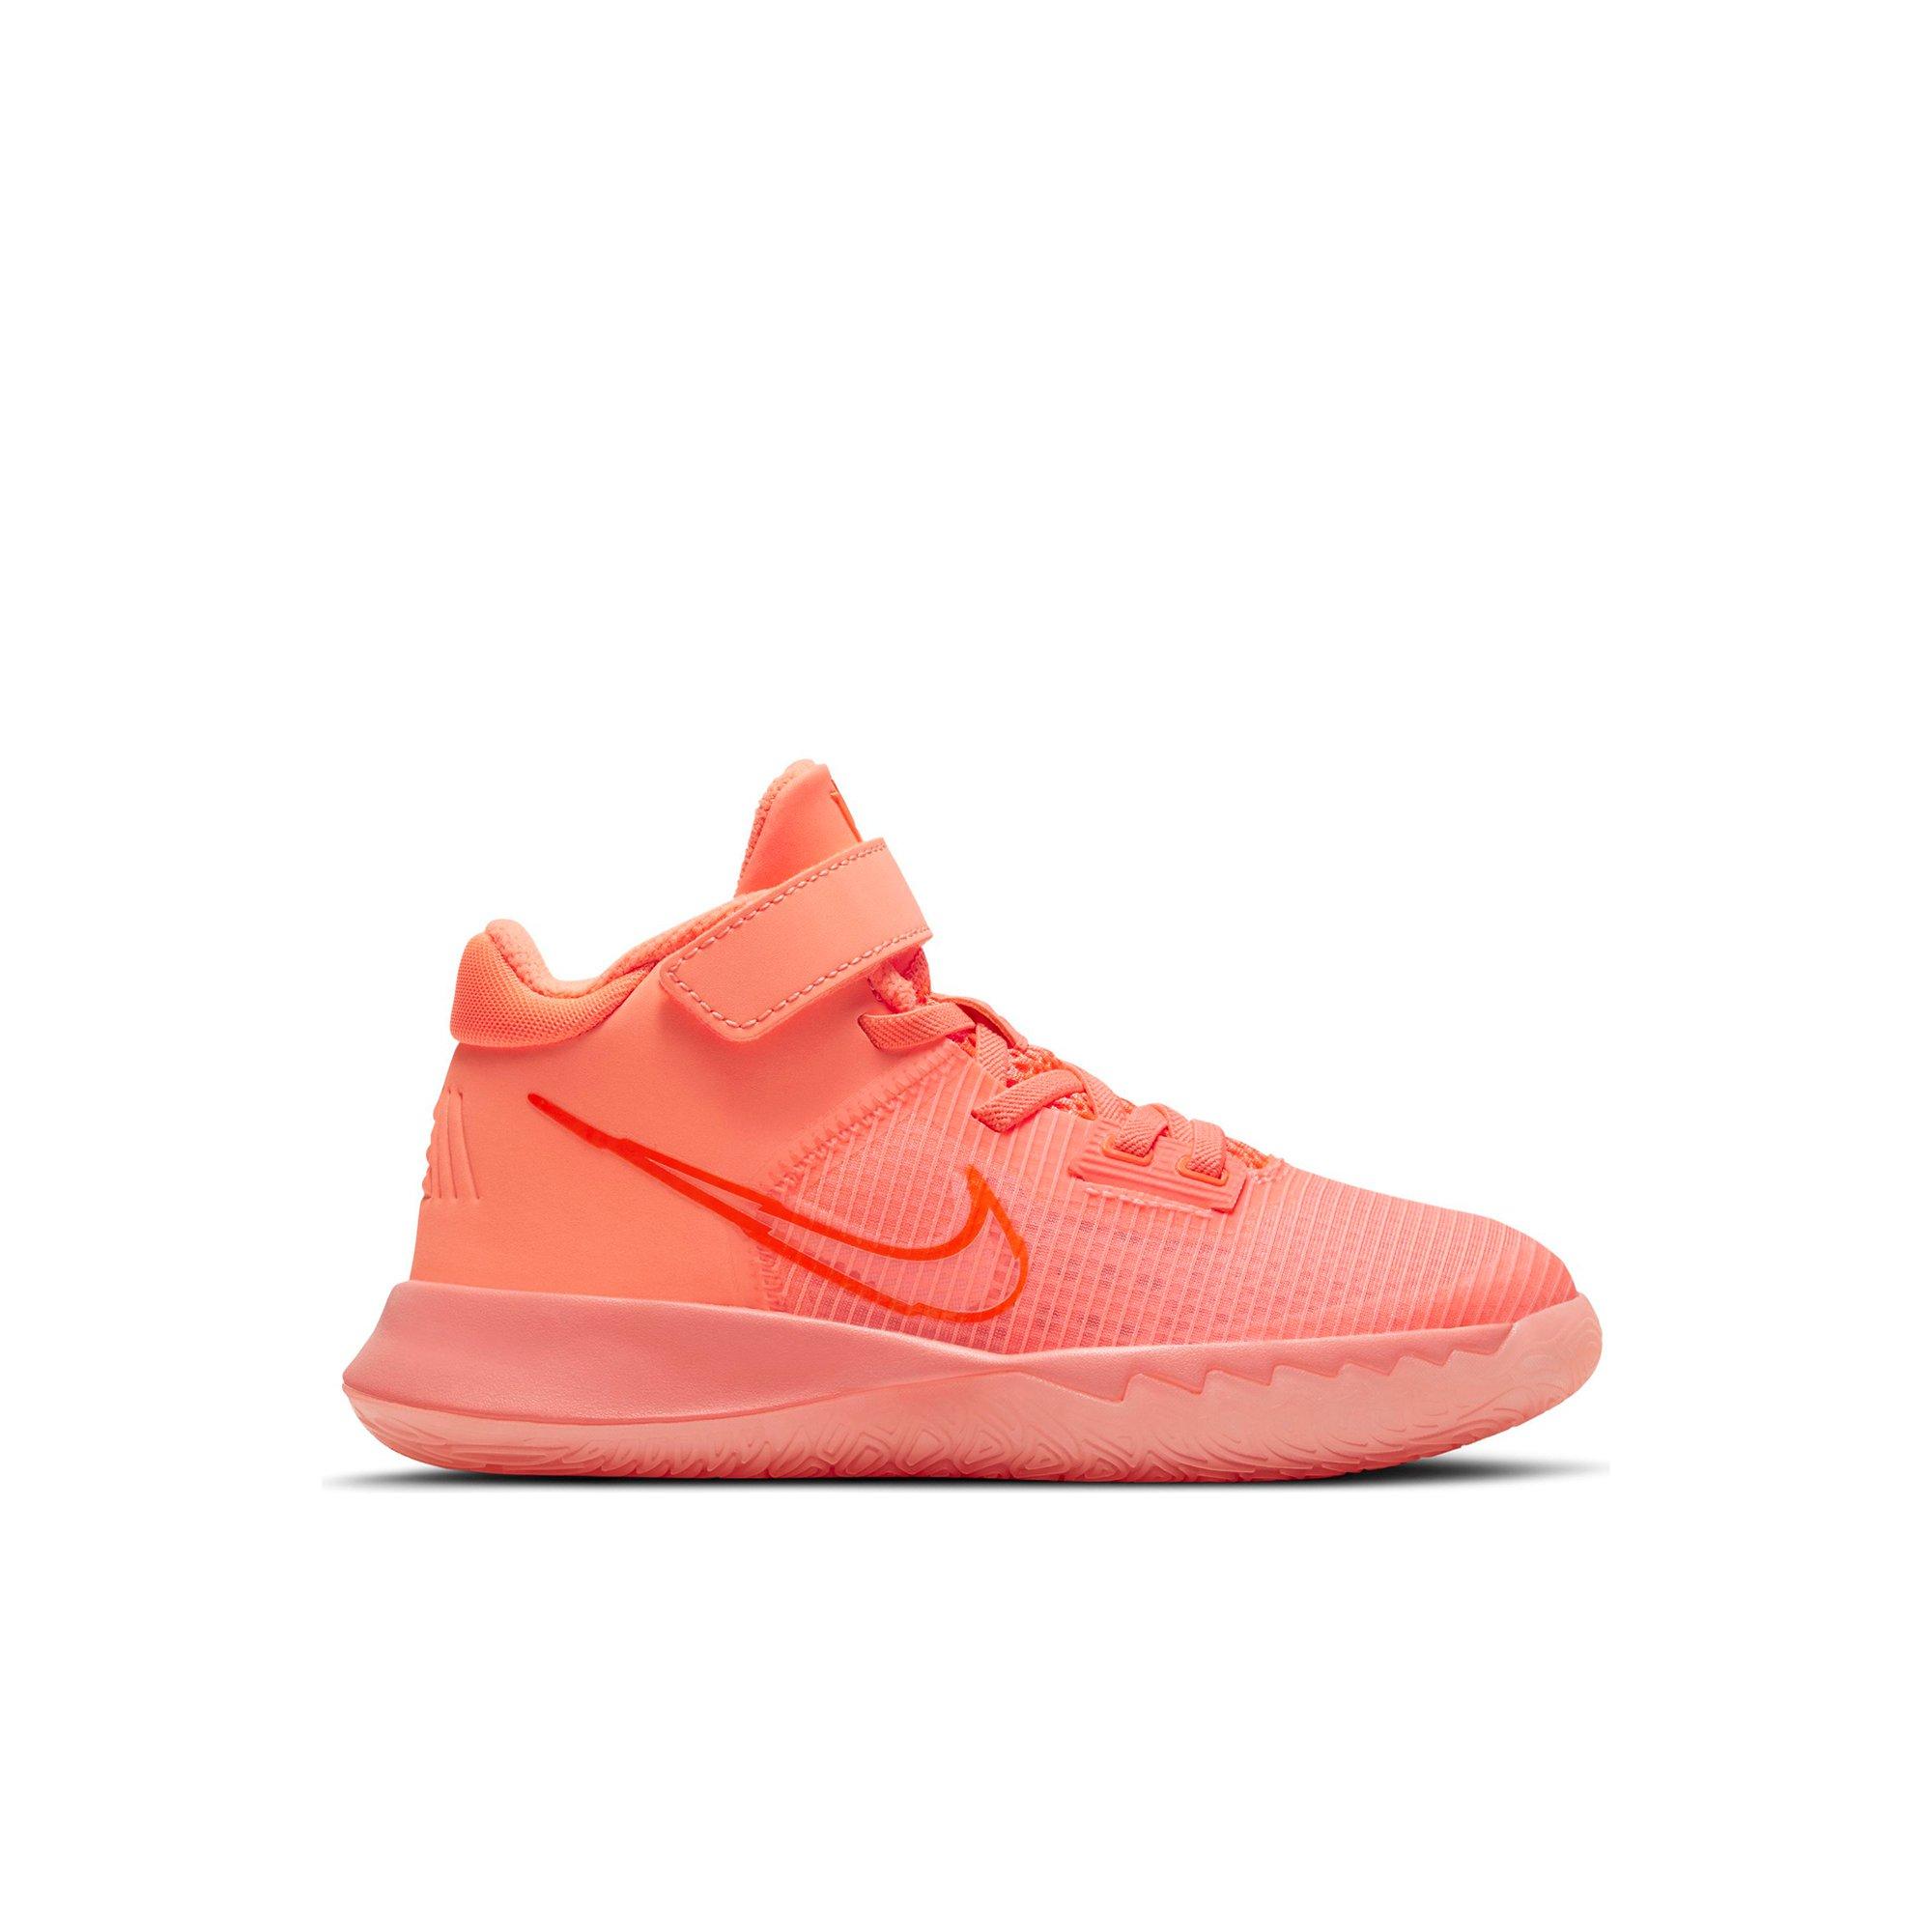 kyrie irving shoes kids pink